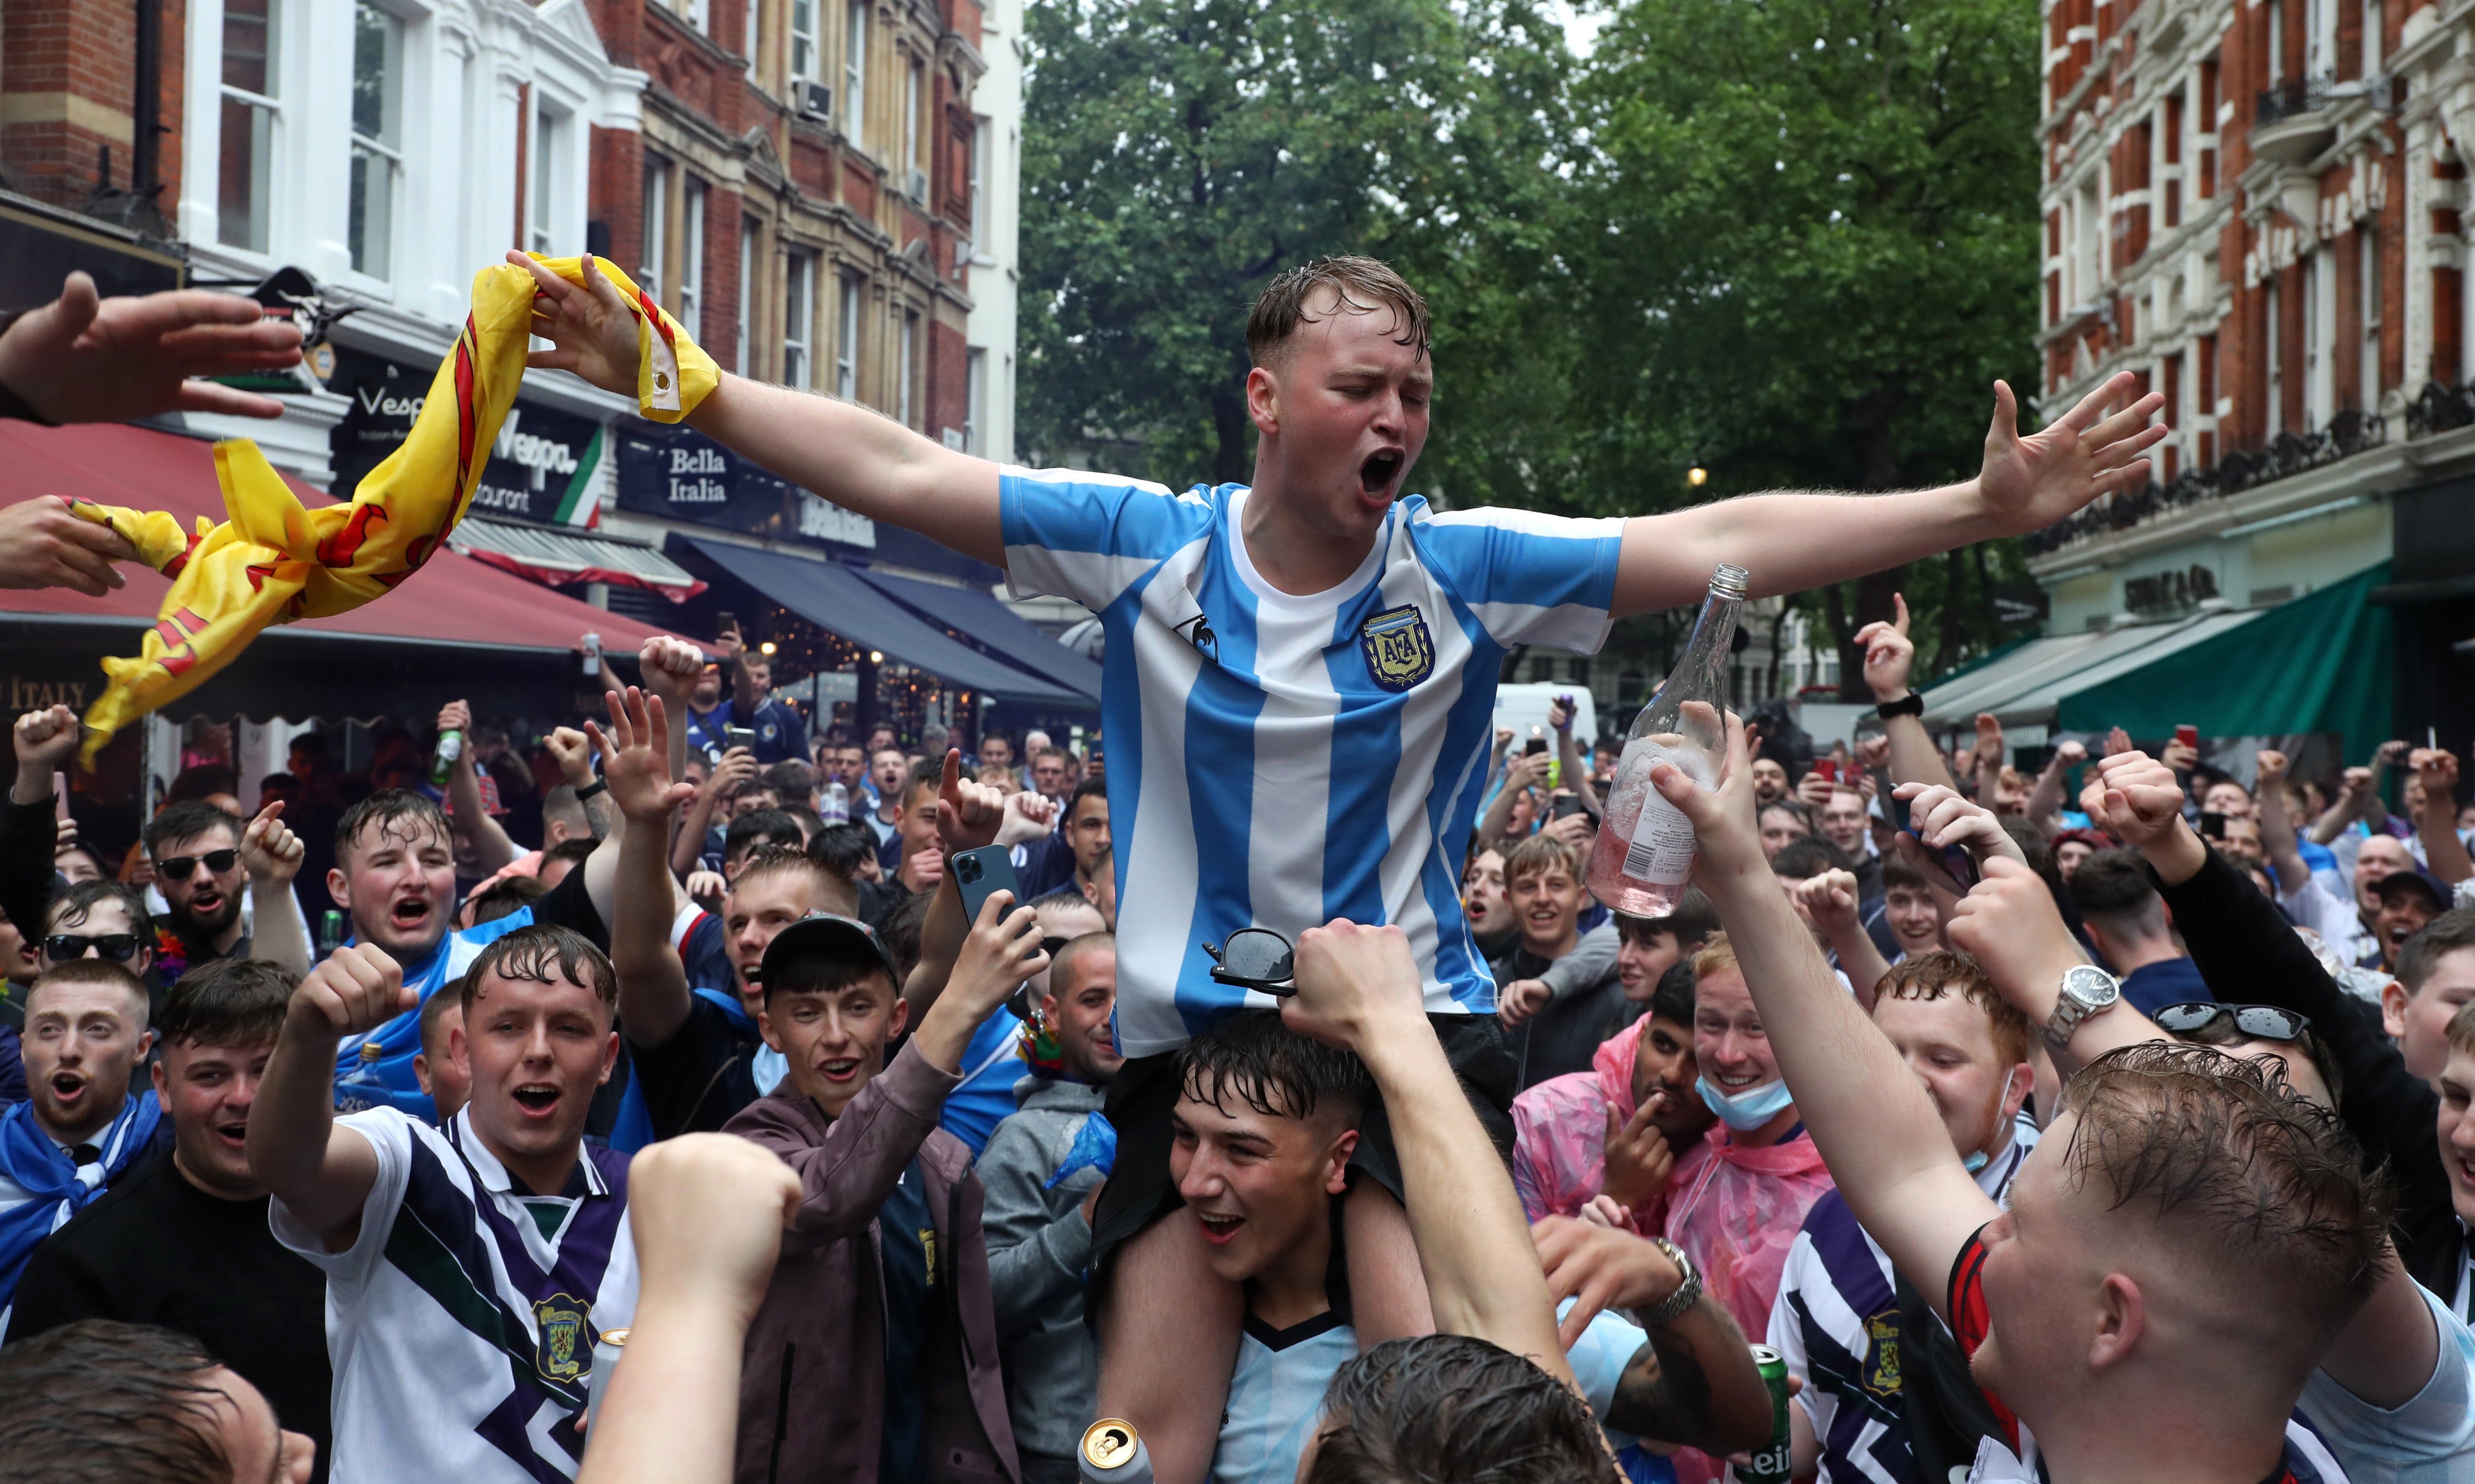 Scotland fans gather in Leicester Square before the UEFA Euro 2020 match between England and Scotland later tonight.